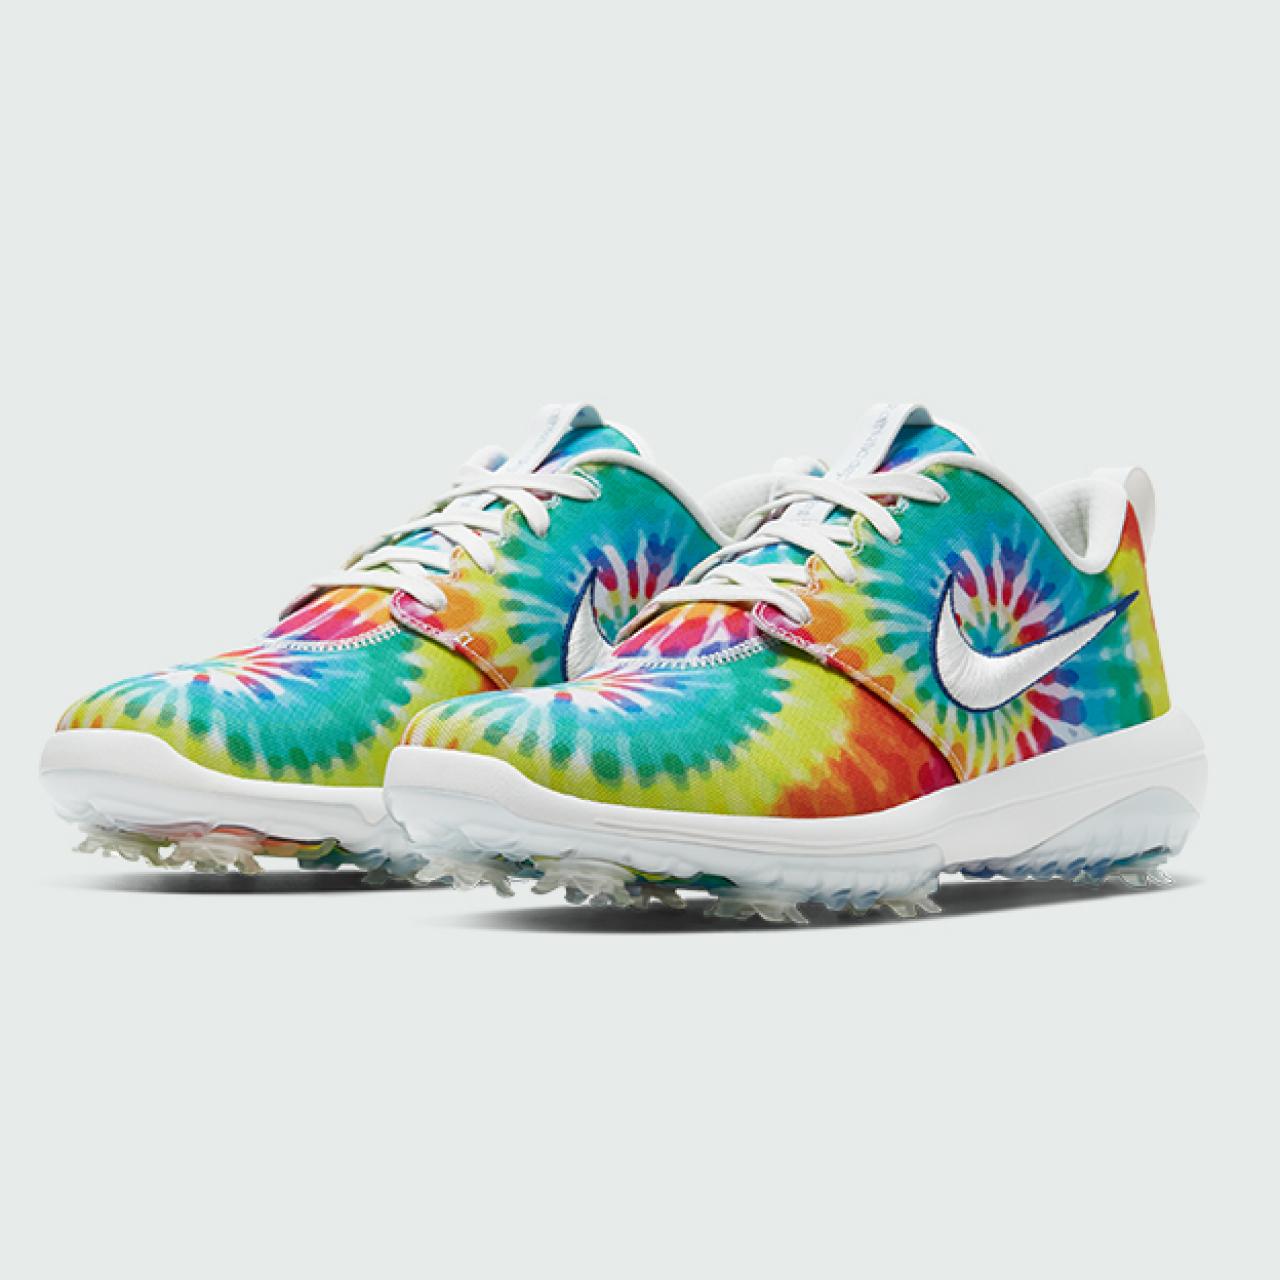 Influyente conversión Shinkan Nike tie-dye Air Jordans, Air Max 97s, Roshe Gs and Zoom Infinity Tour golf  shoes to be released for 2020 PGA Championship | Golf Equipment: Clubs,  Balls, Bags | Golf Digest